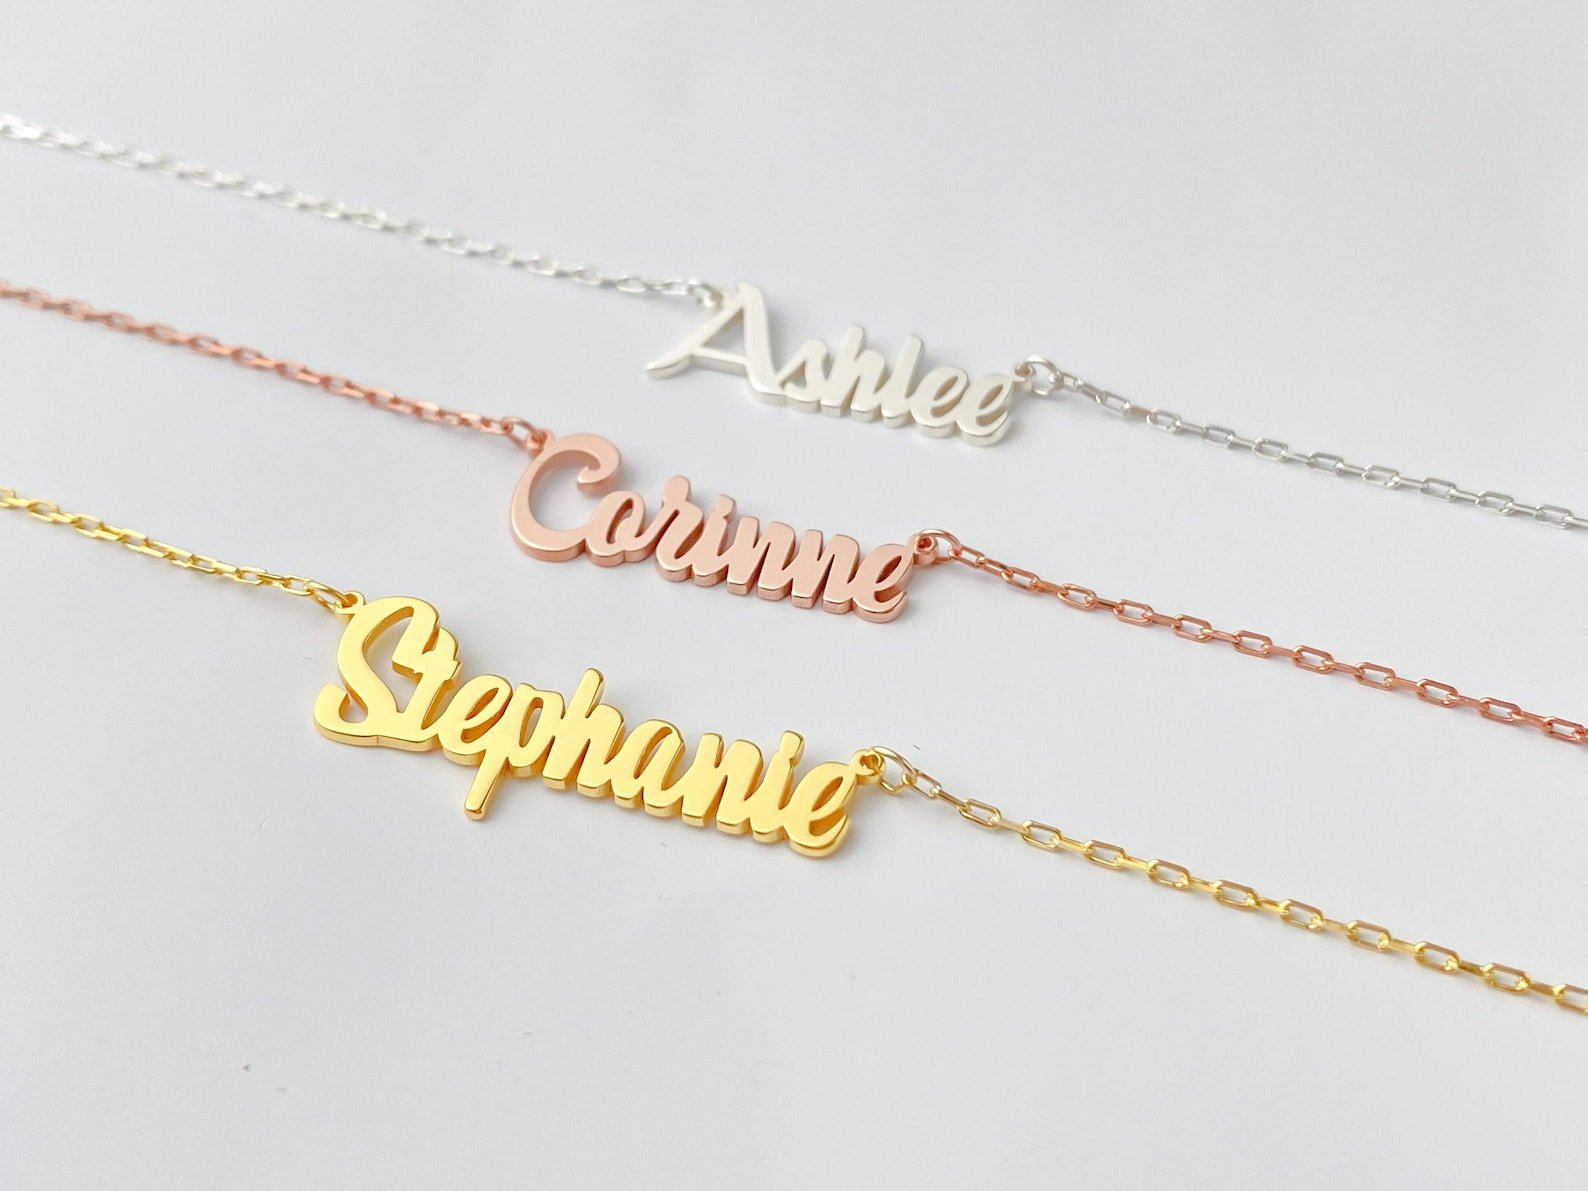 Name Necklace in Sterling Silver - Boltiesd™